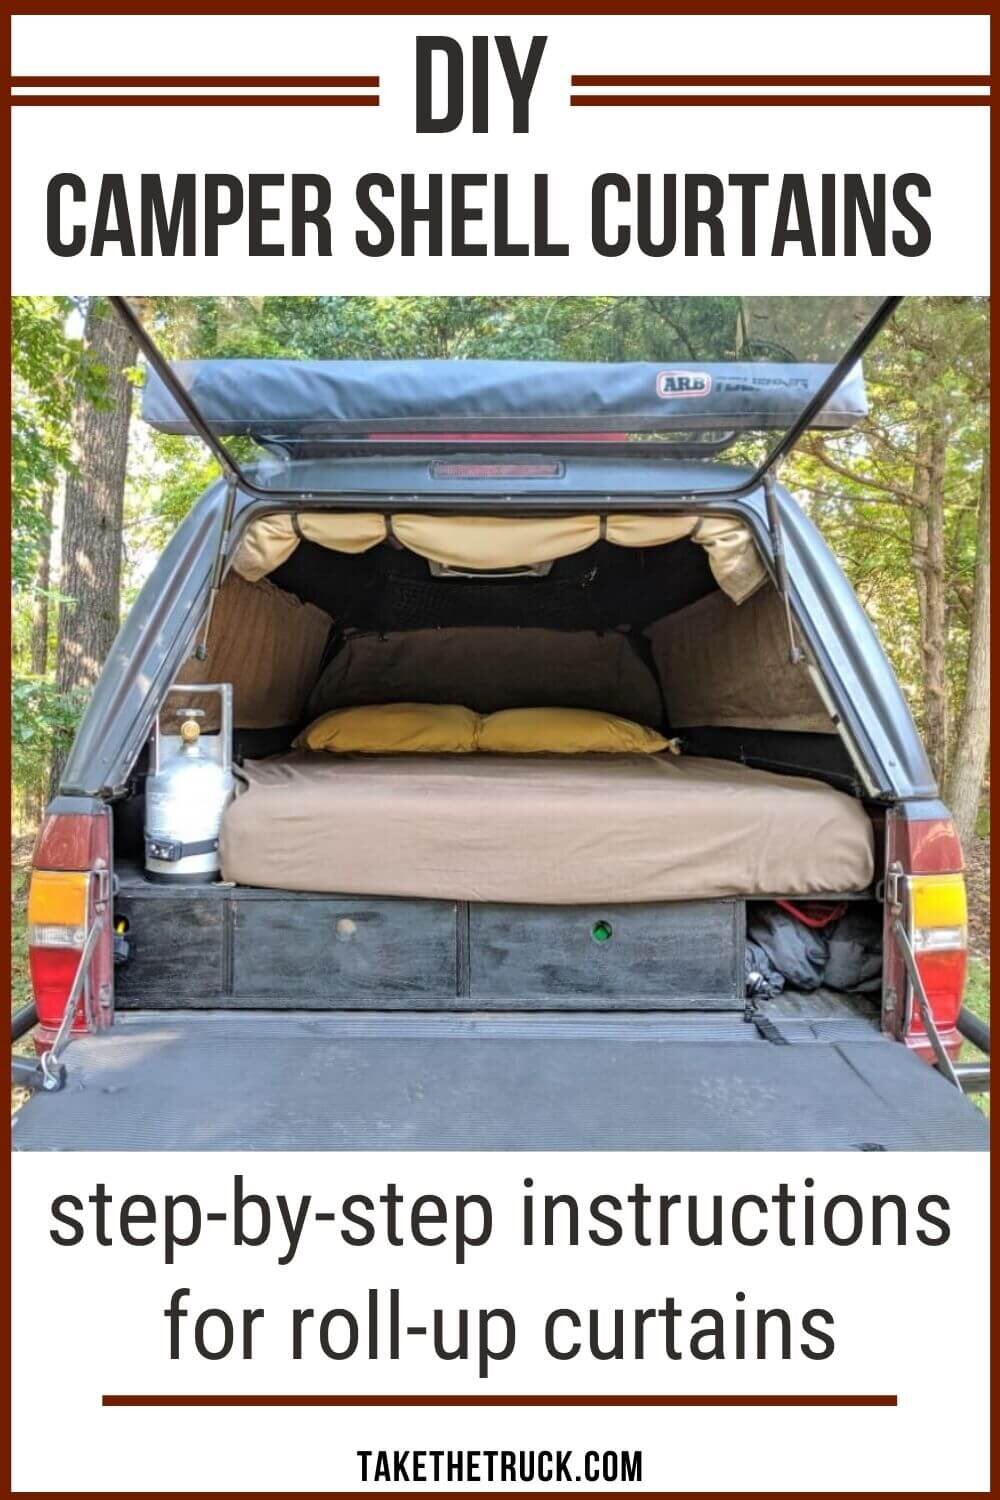 How To Make Roll-Up Camper Shell Curtains | Take The Truck